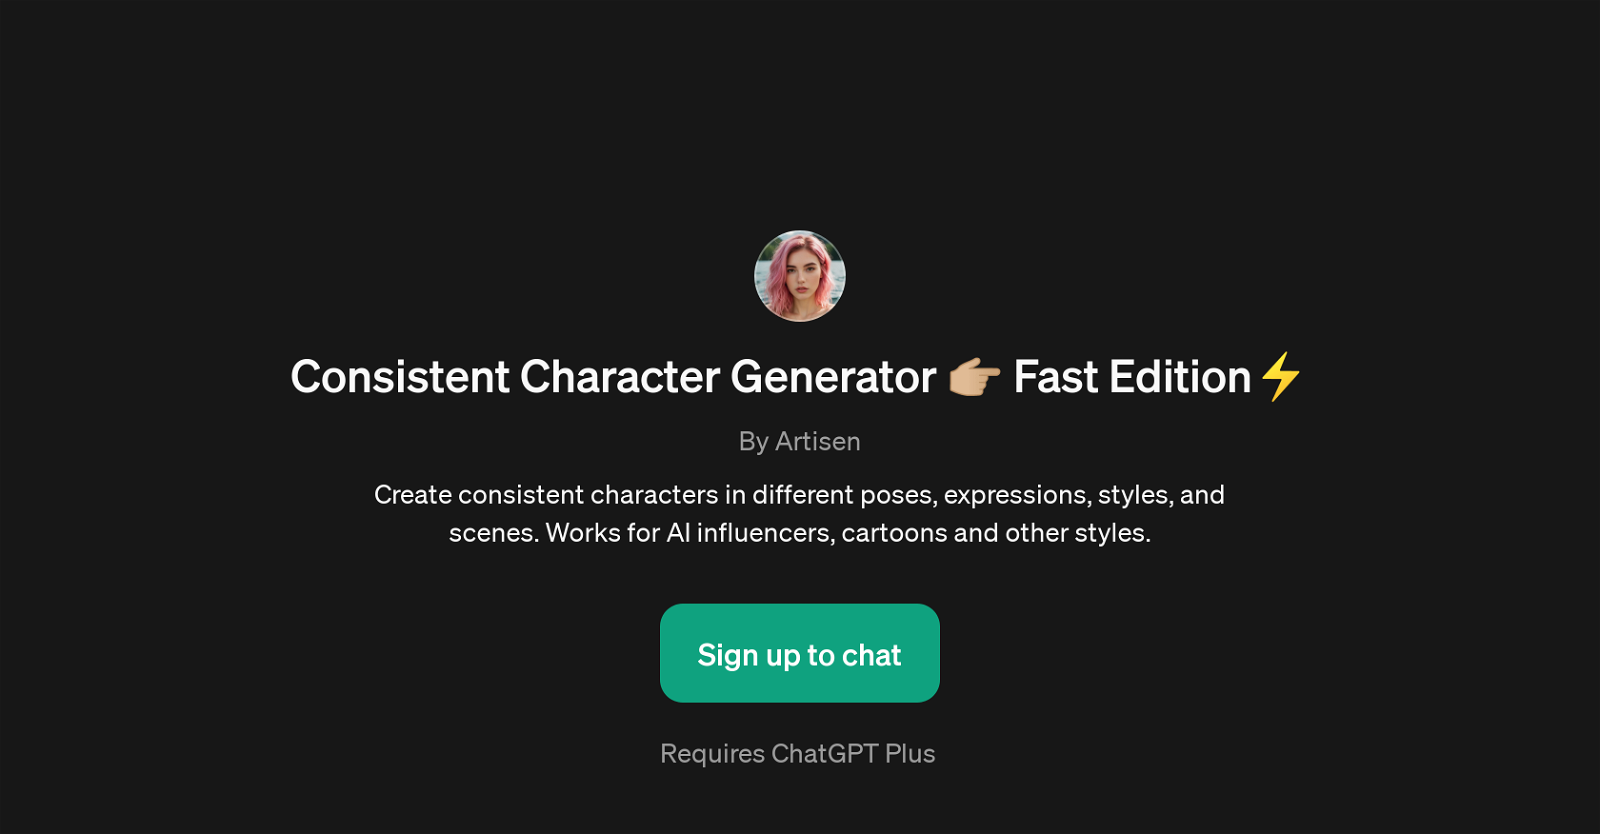 Consistent Character Generator Fast Edition website